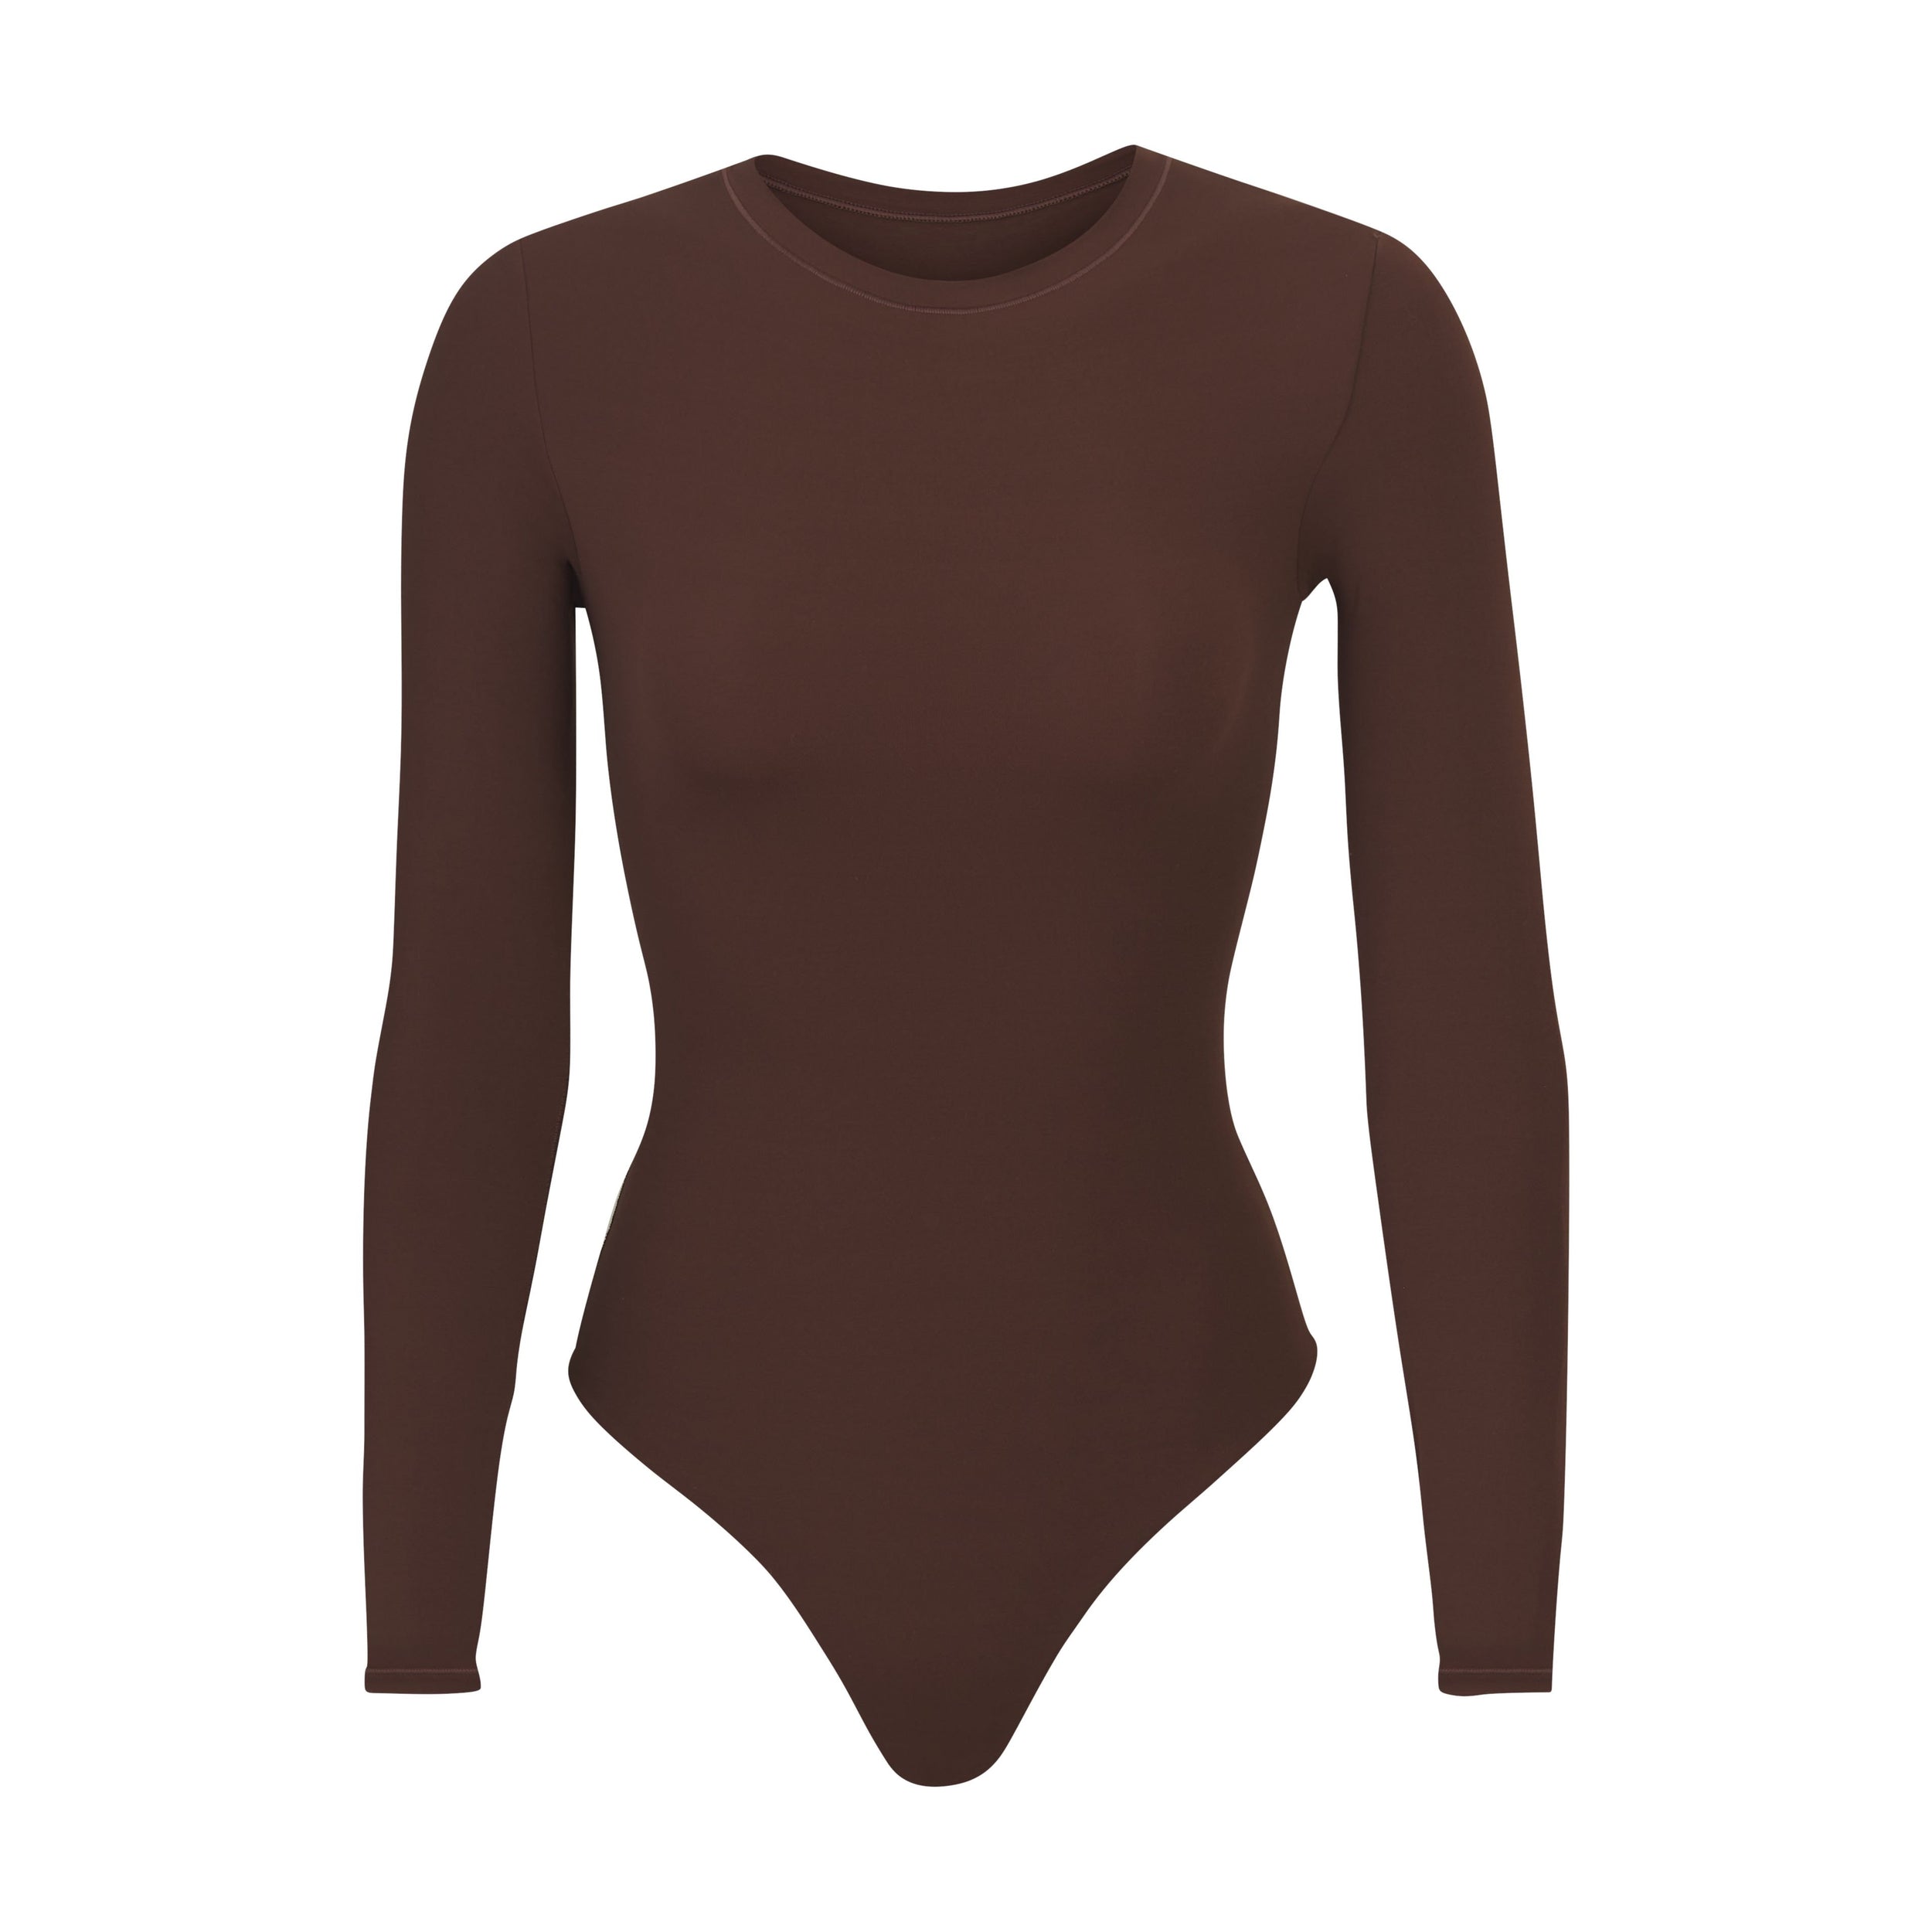 SKIMS on X: SKIMS Essential Bodysuits provide the perfect base layer for  all of your day to night looks. Shop our 7 Essential Bodysuit styles in  sizes XXS - 5X:   /